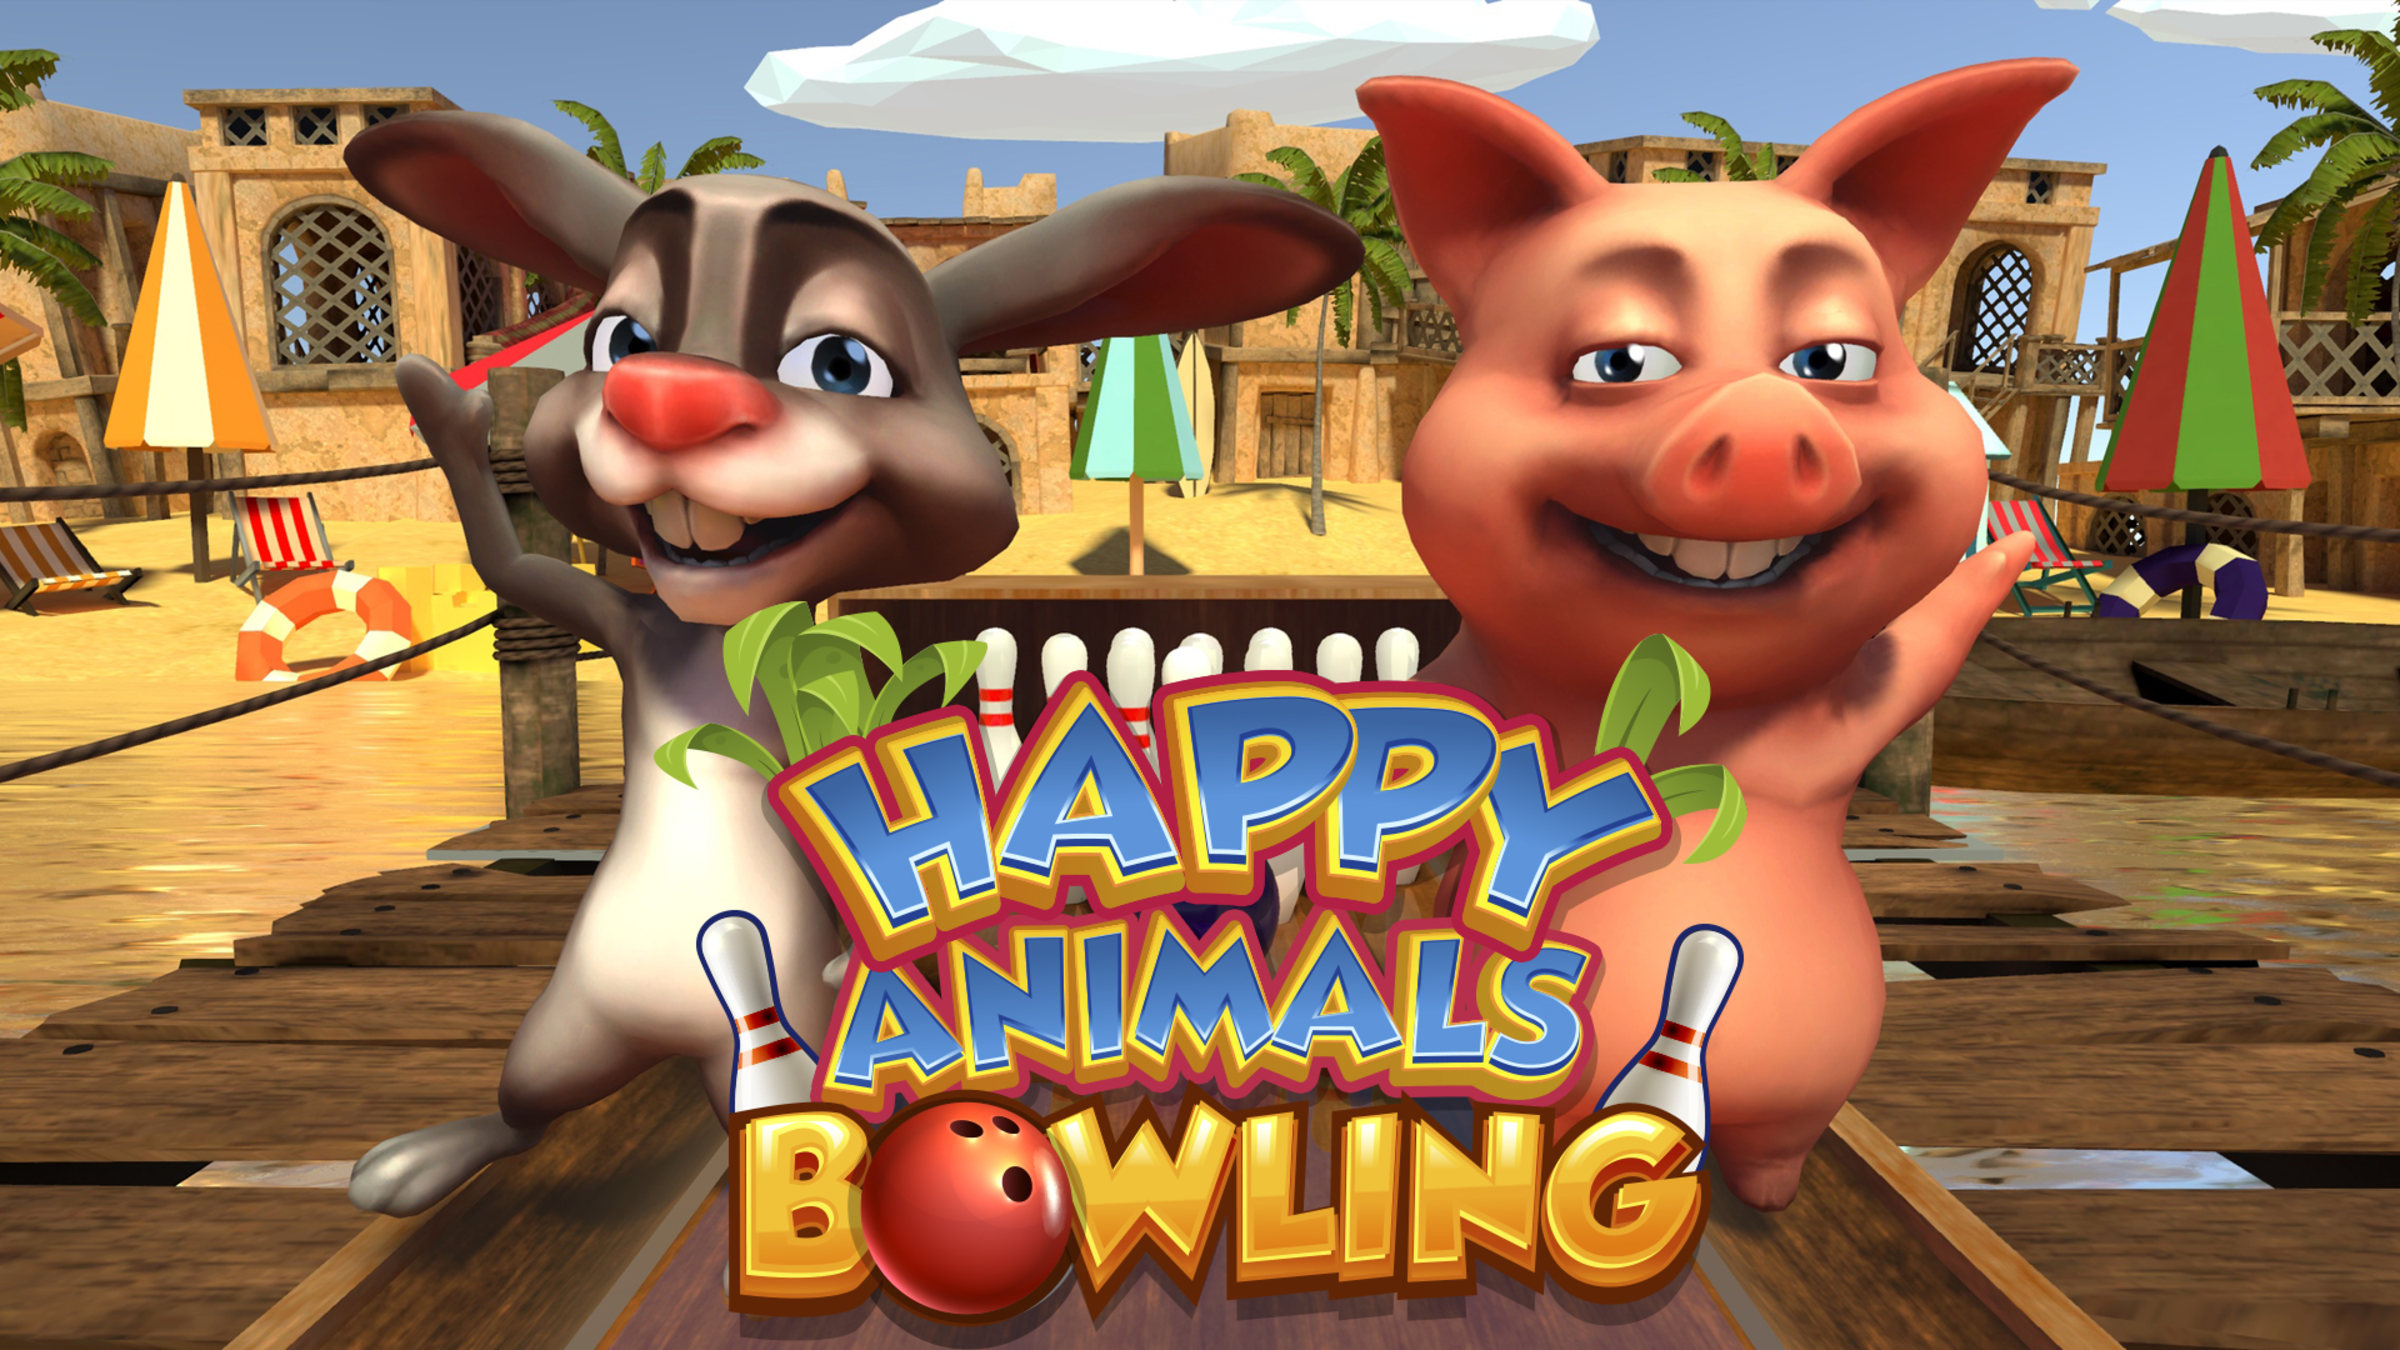 Happy Animals Bowling for Nintendo Switch - Nintendo Official Site